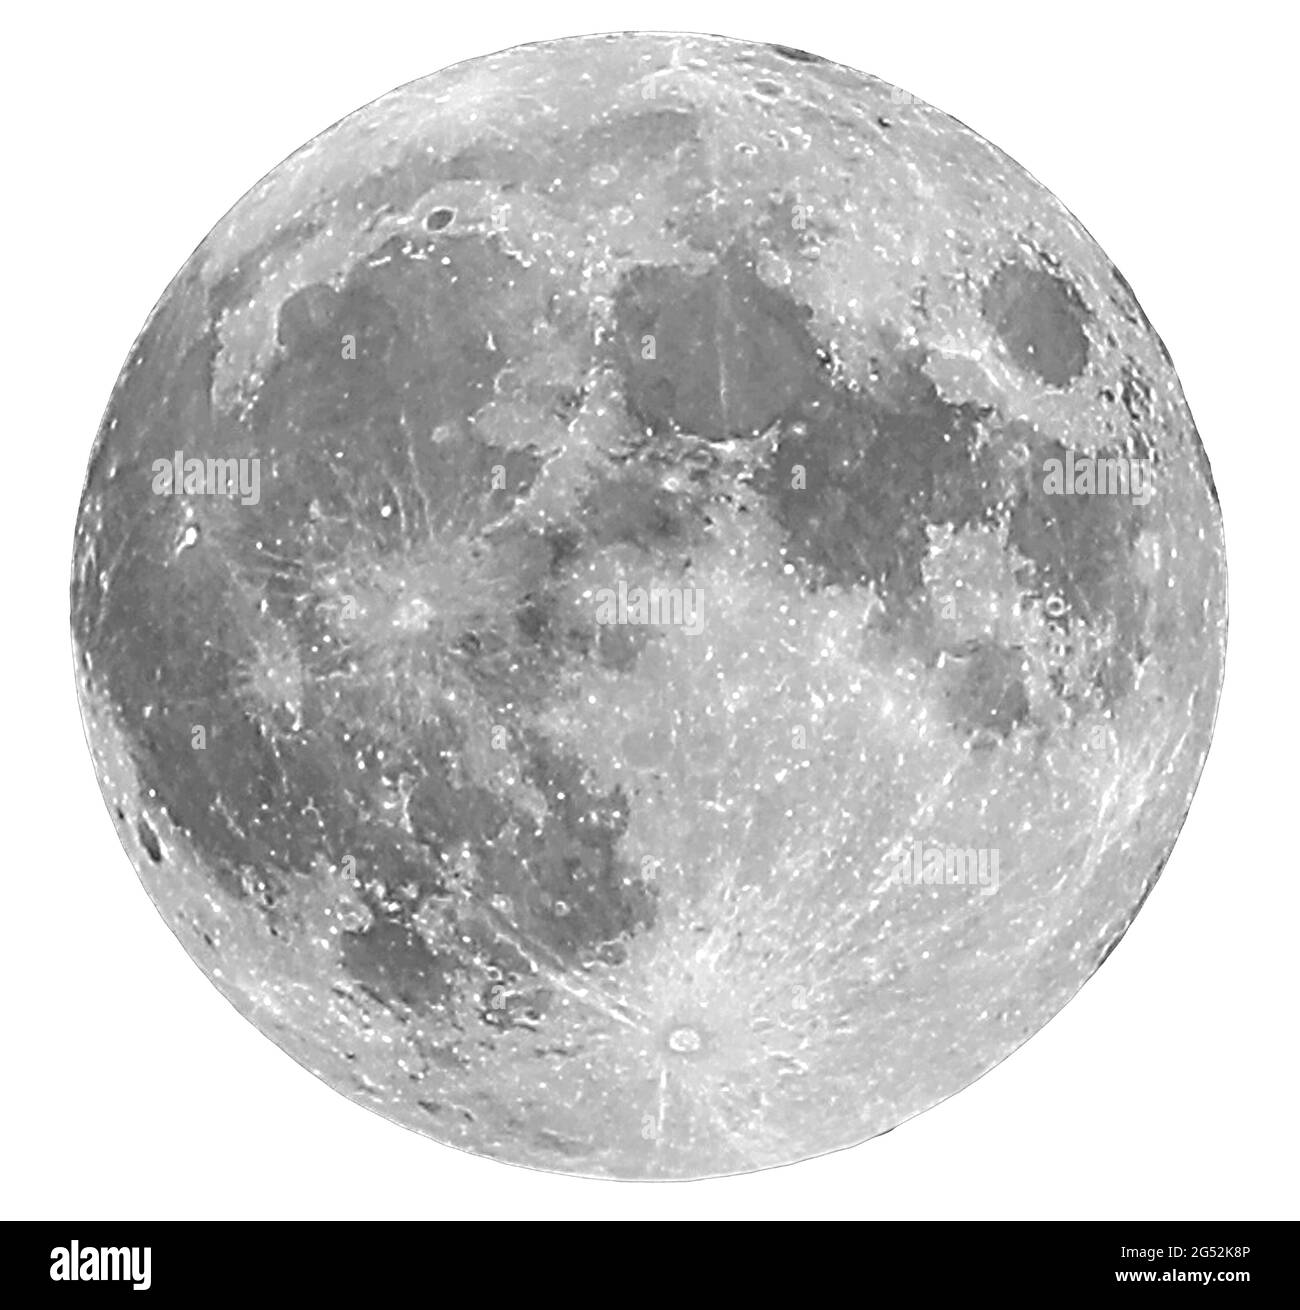 Huge Moon with clearly visible craters on a white background Stock Photo